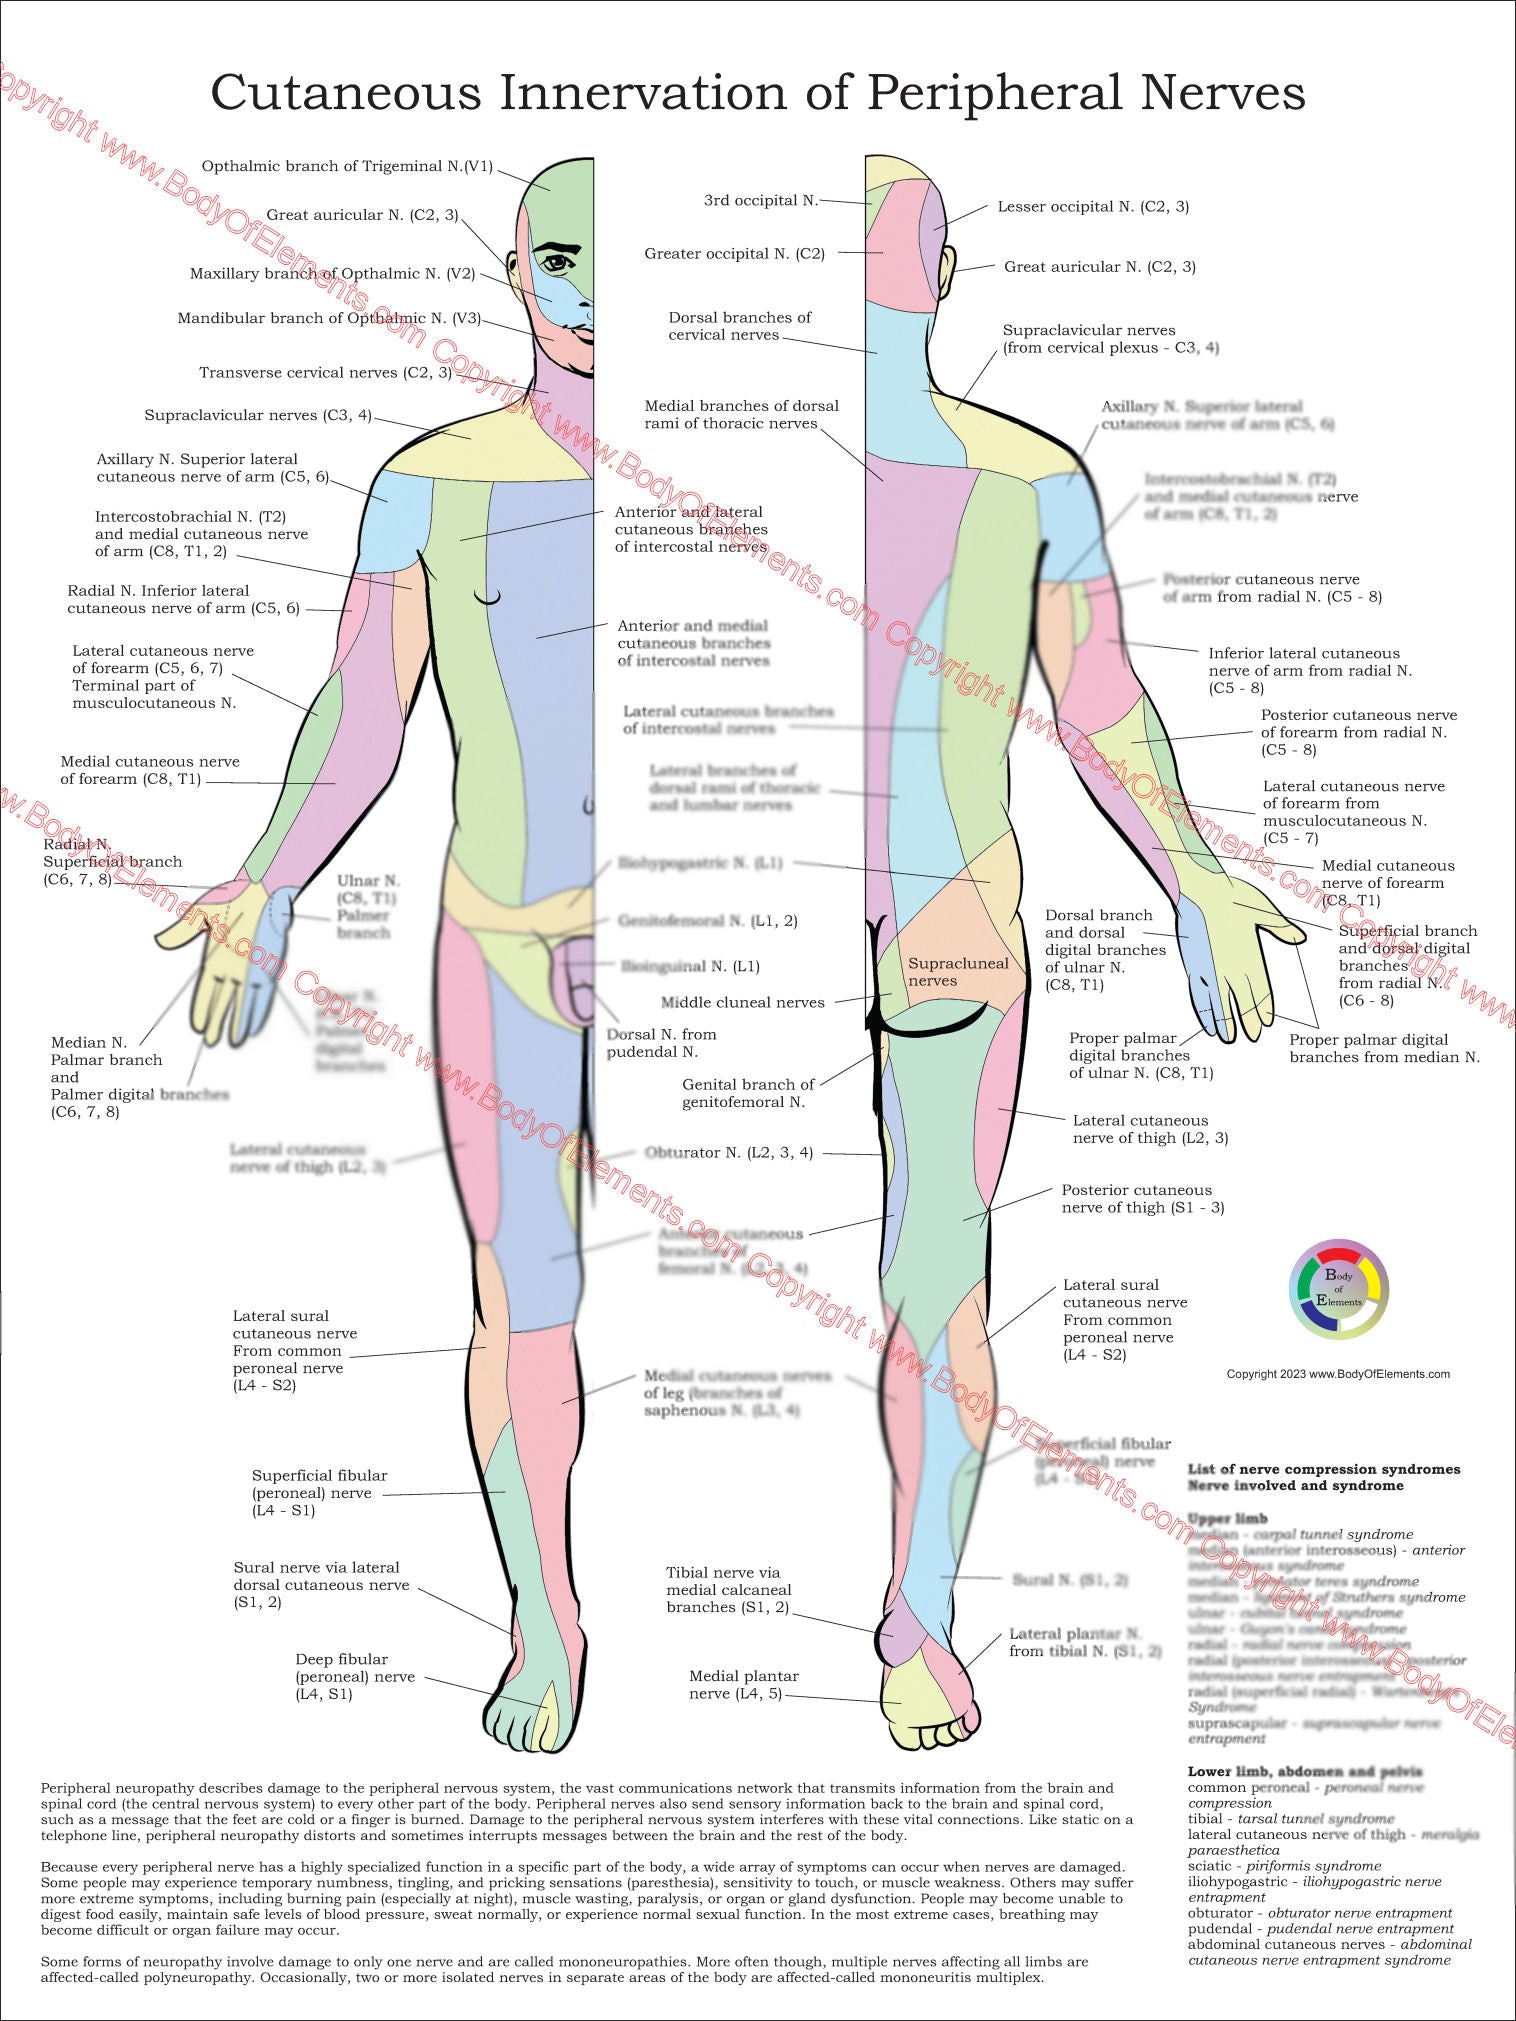 Cutaneous innervation of the peripheral nerves chart